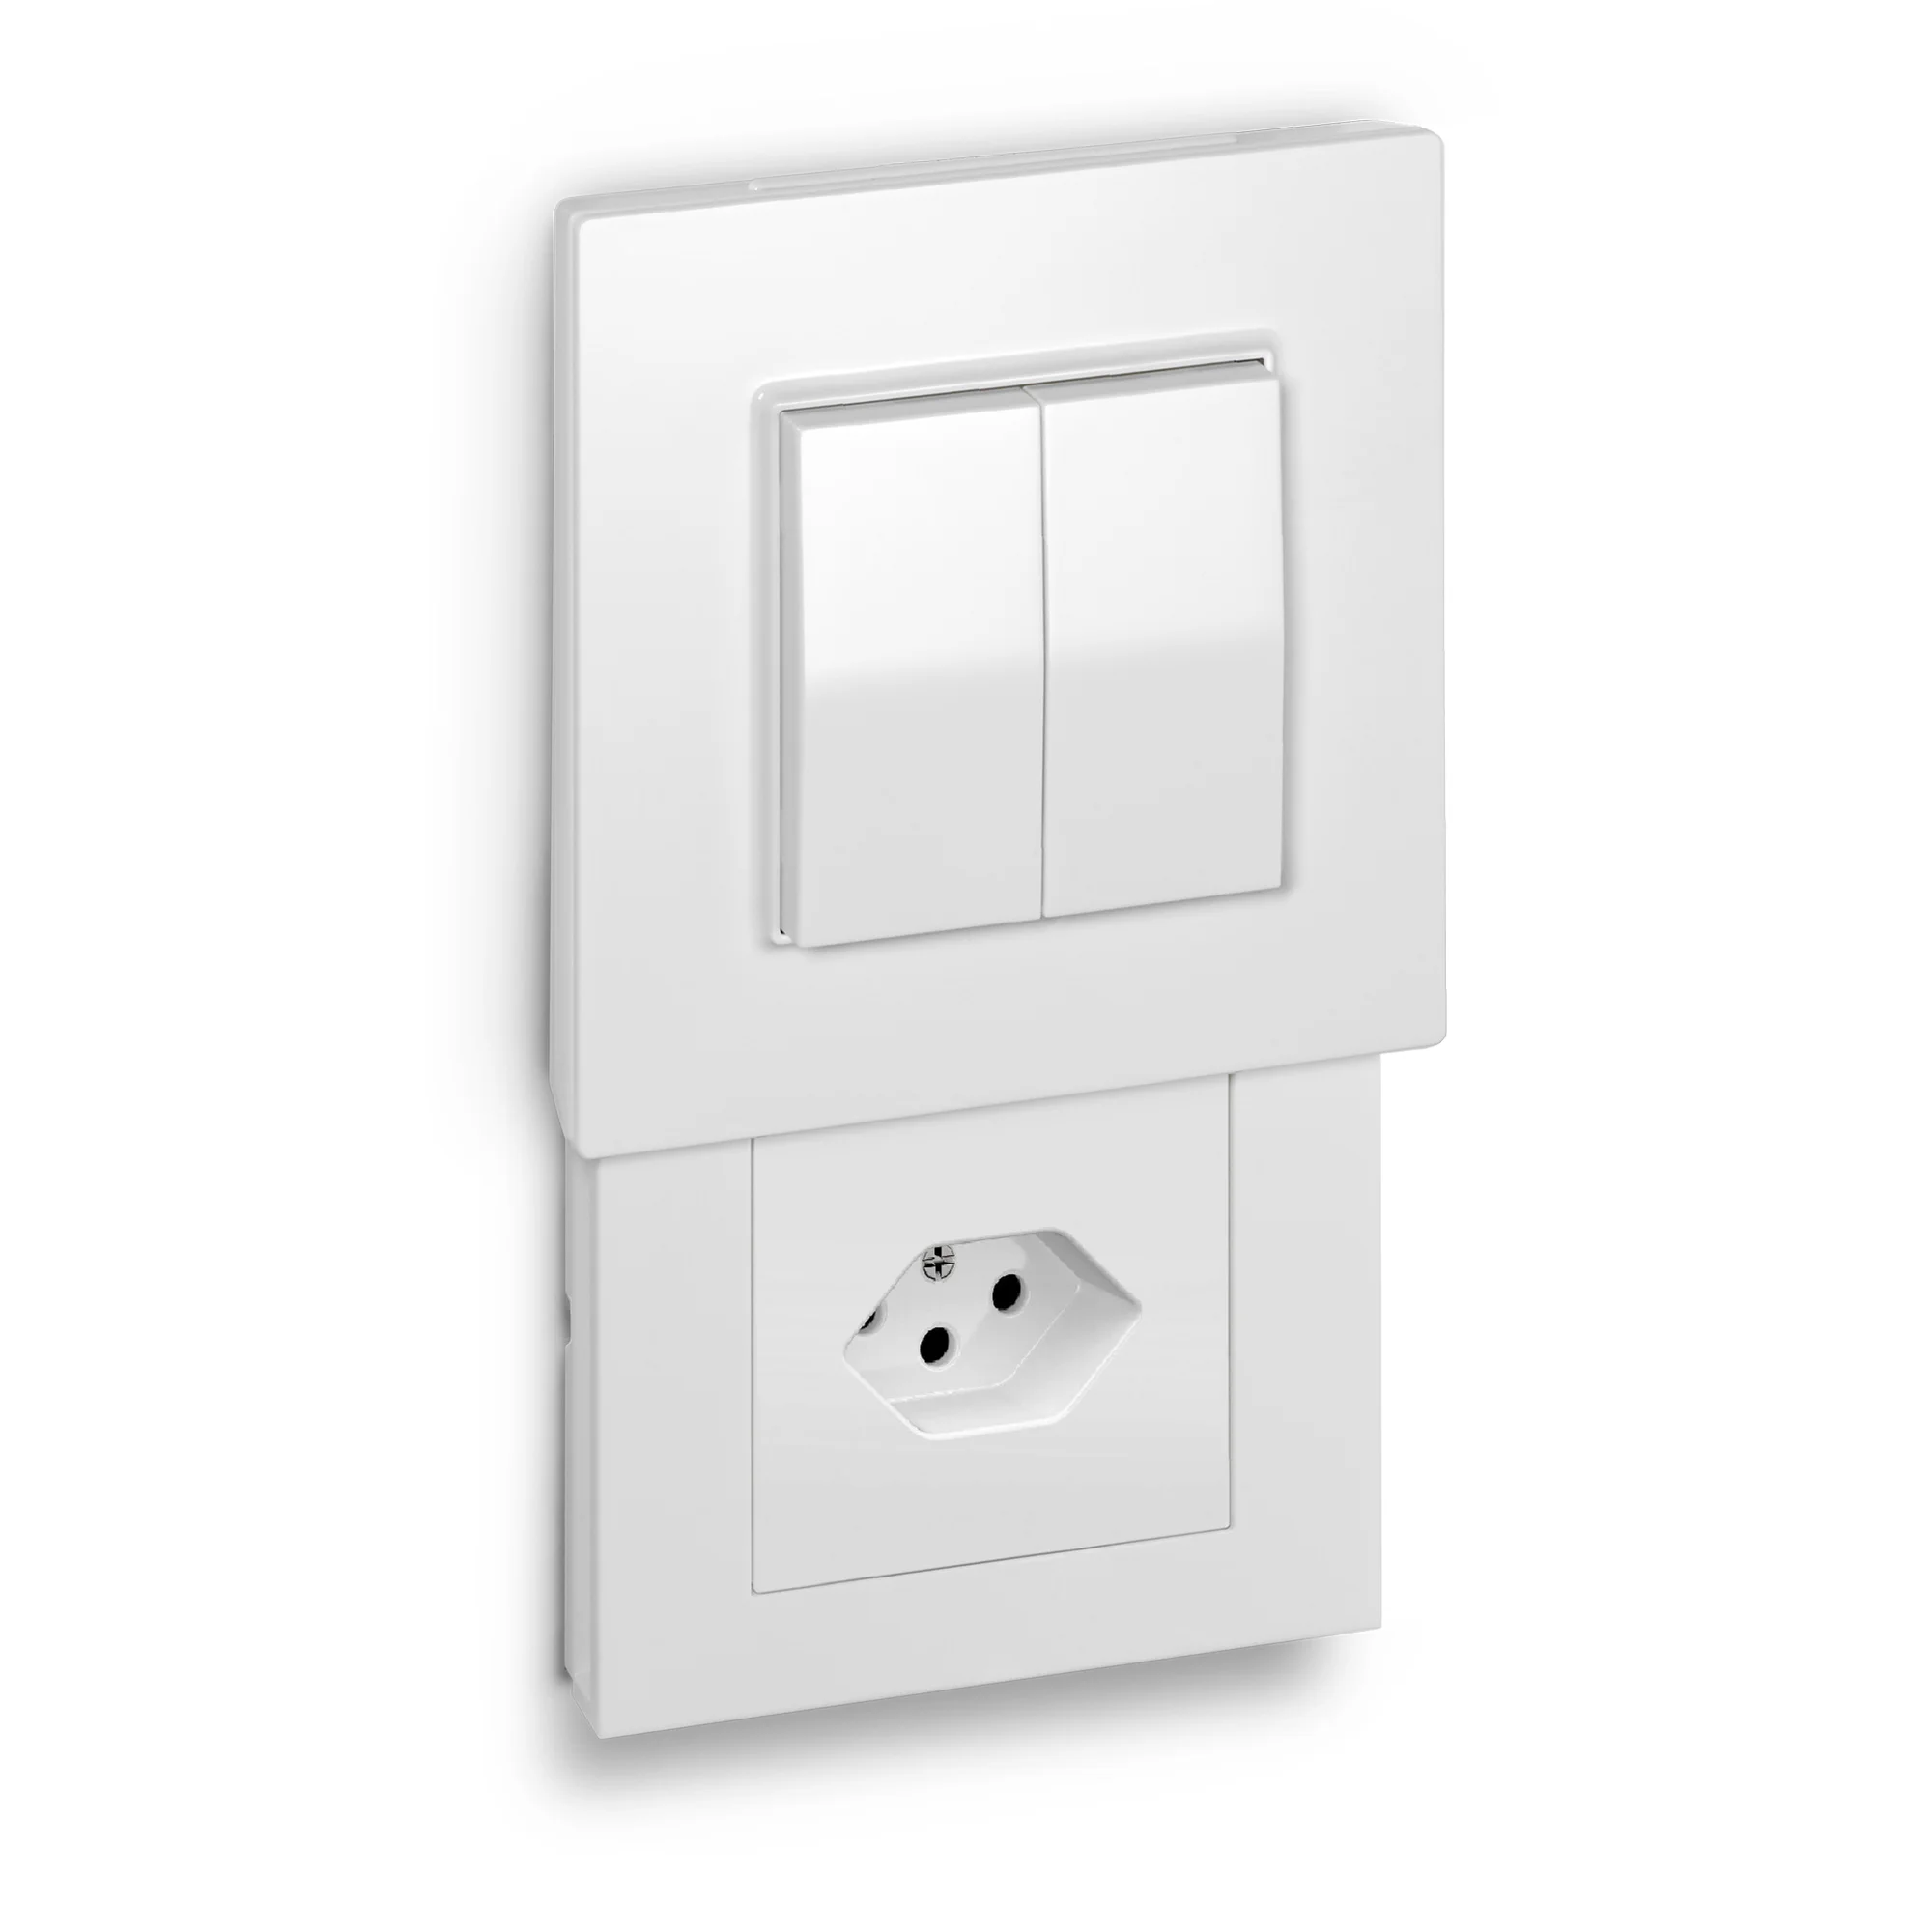 Hidden Socket | Versteckdose® with Casambi switch with socket insert for plug type J (CH)